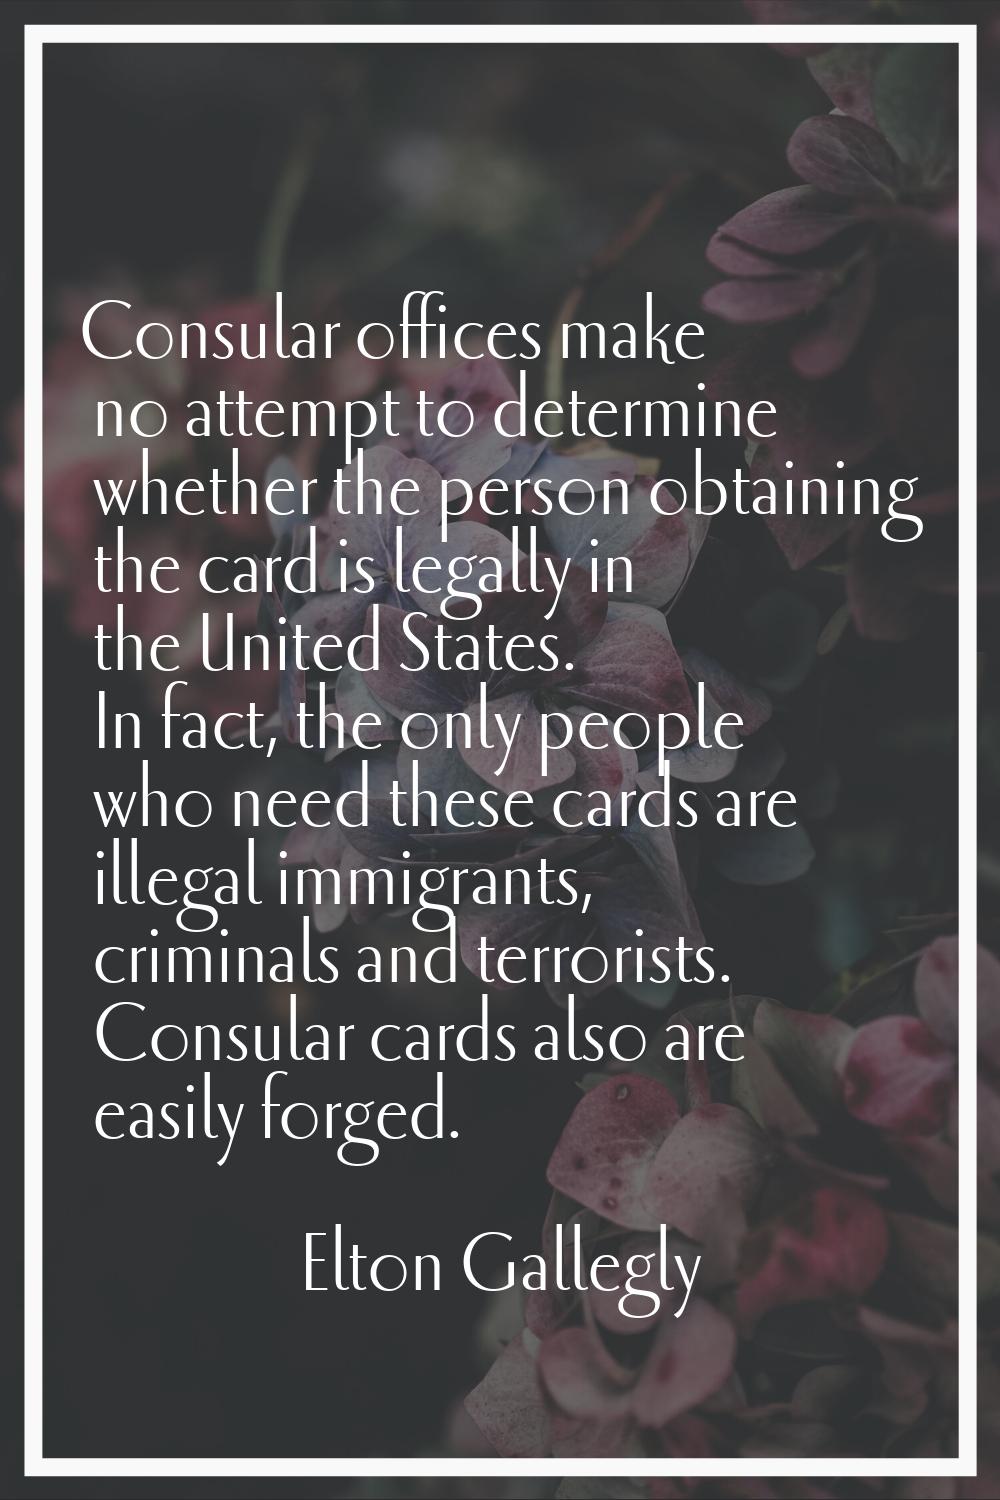 Consular offices make no attempt to determine whether the person obtaining the card is legally in t